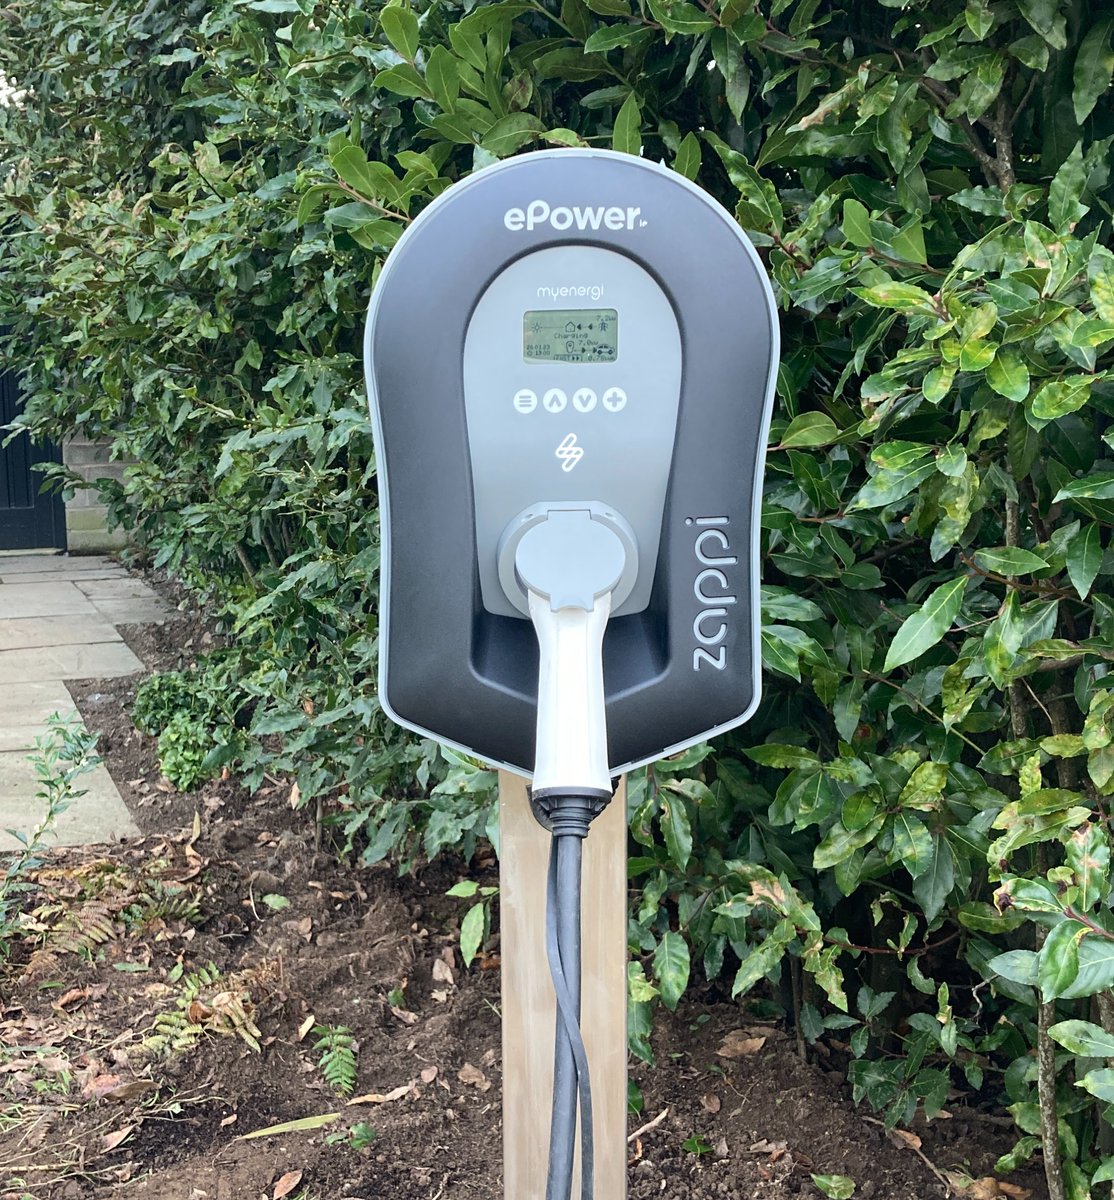 A recent installation of a stand-alone Zappi EV Charger on a pedestal. This is a great alternative for those who rather not have a wall mounted charger at their dwelling.🏠

#zappi #myenergi #evchargers #evchargerinstallation #evinstallers #ev #epower